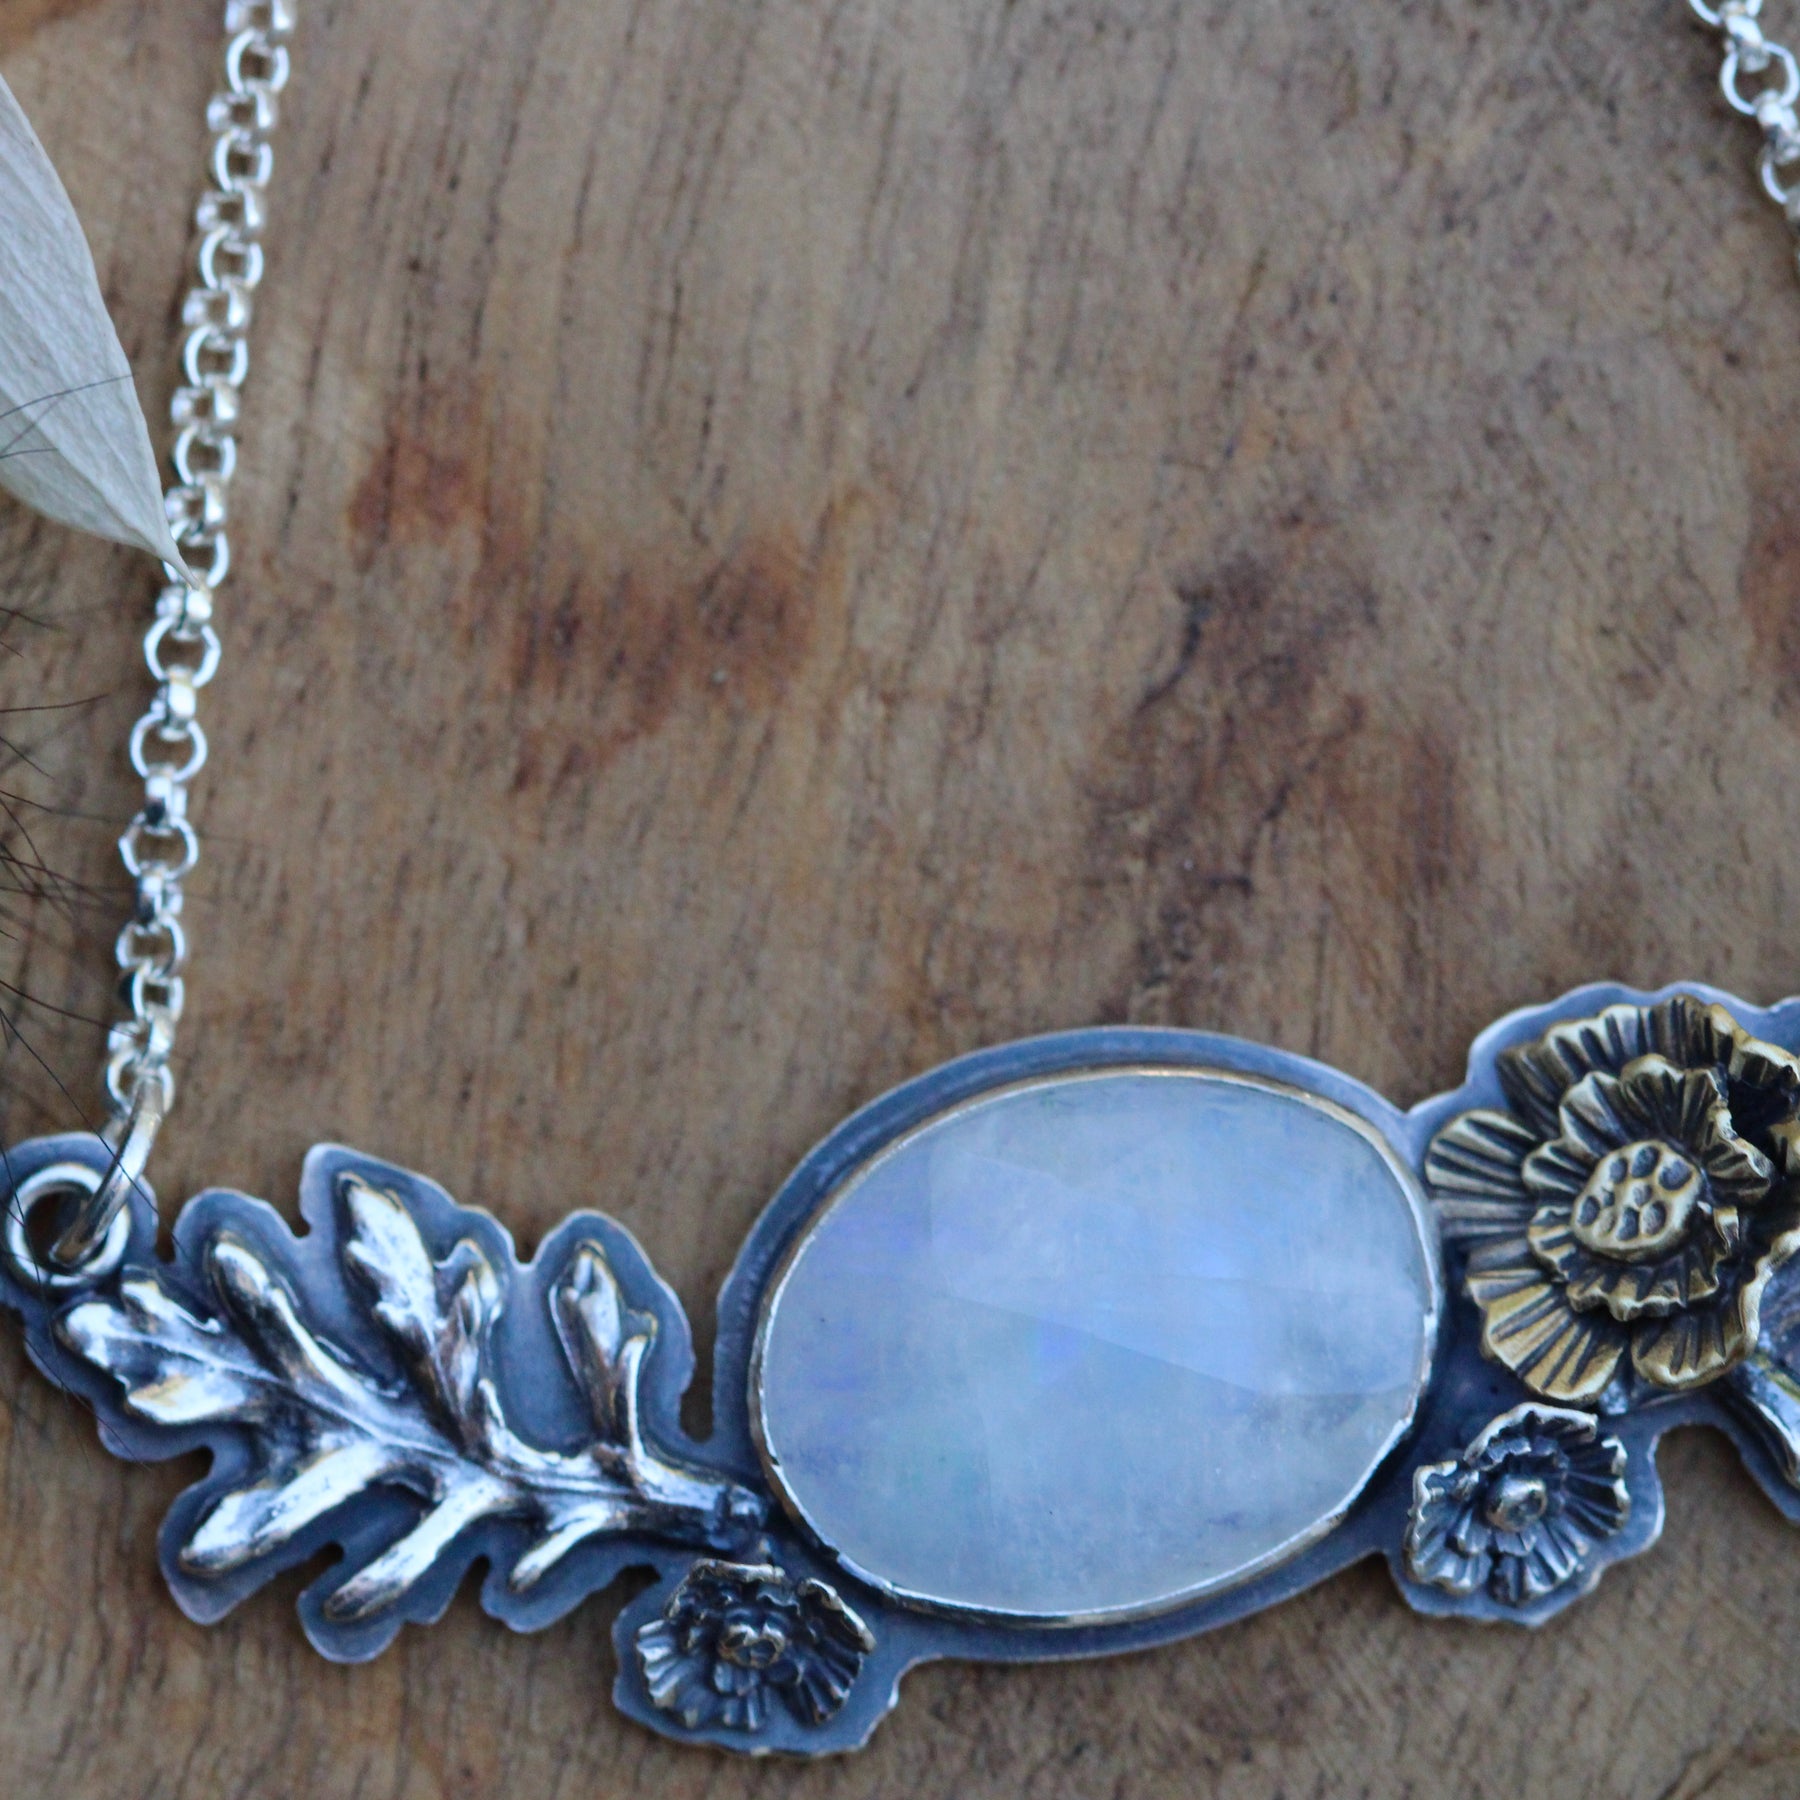 Clearance Sale Wildflower wanderings Moonstone and poppies necklace